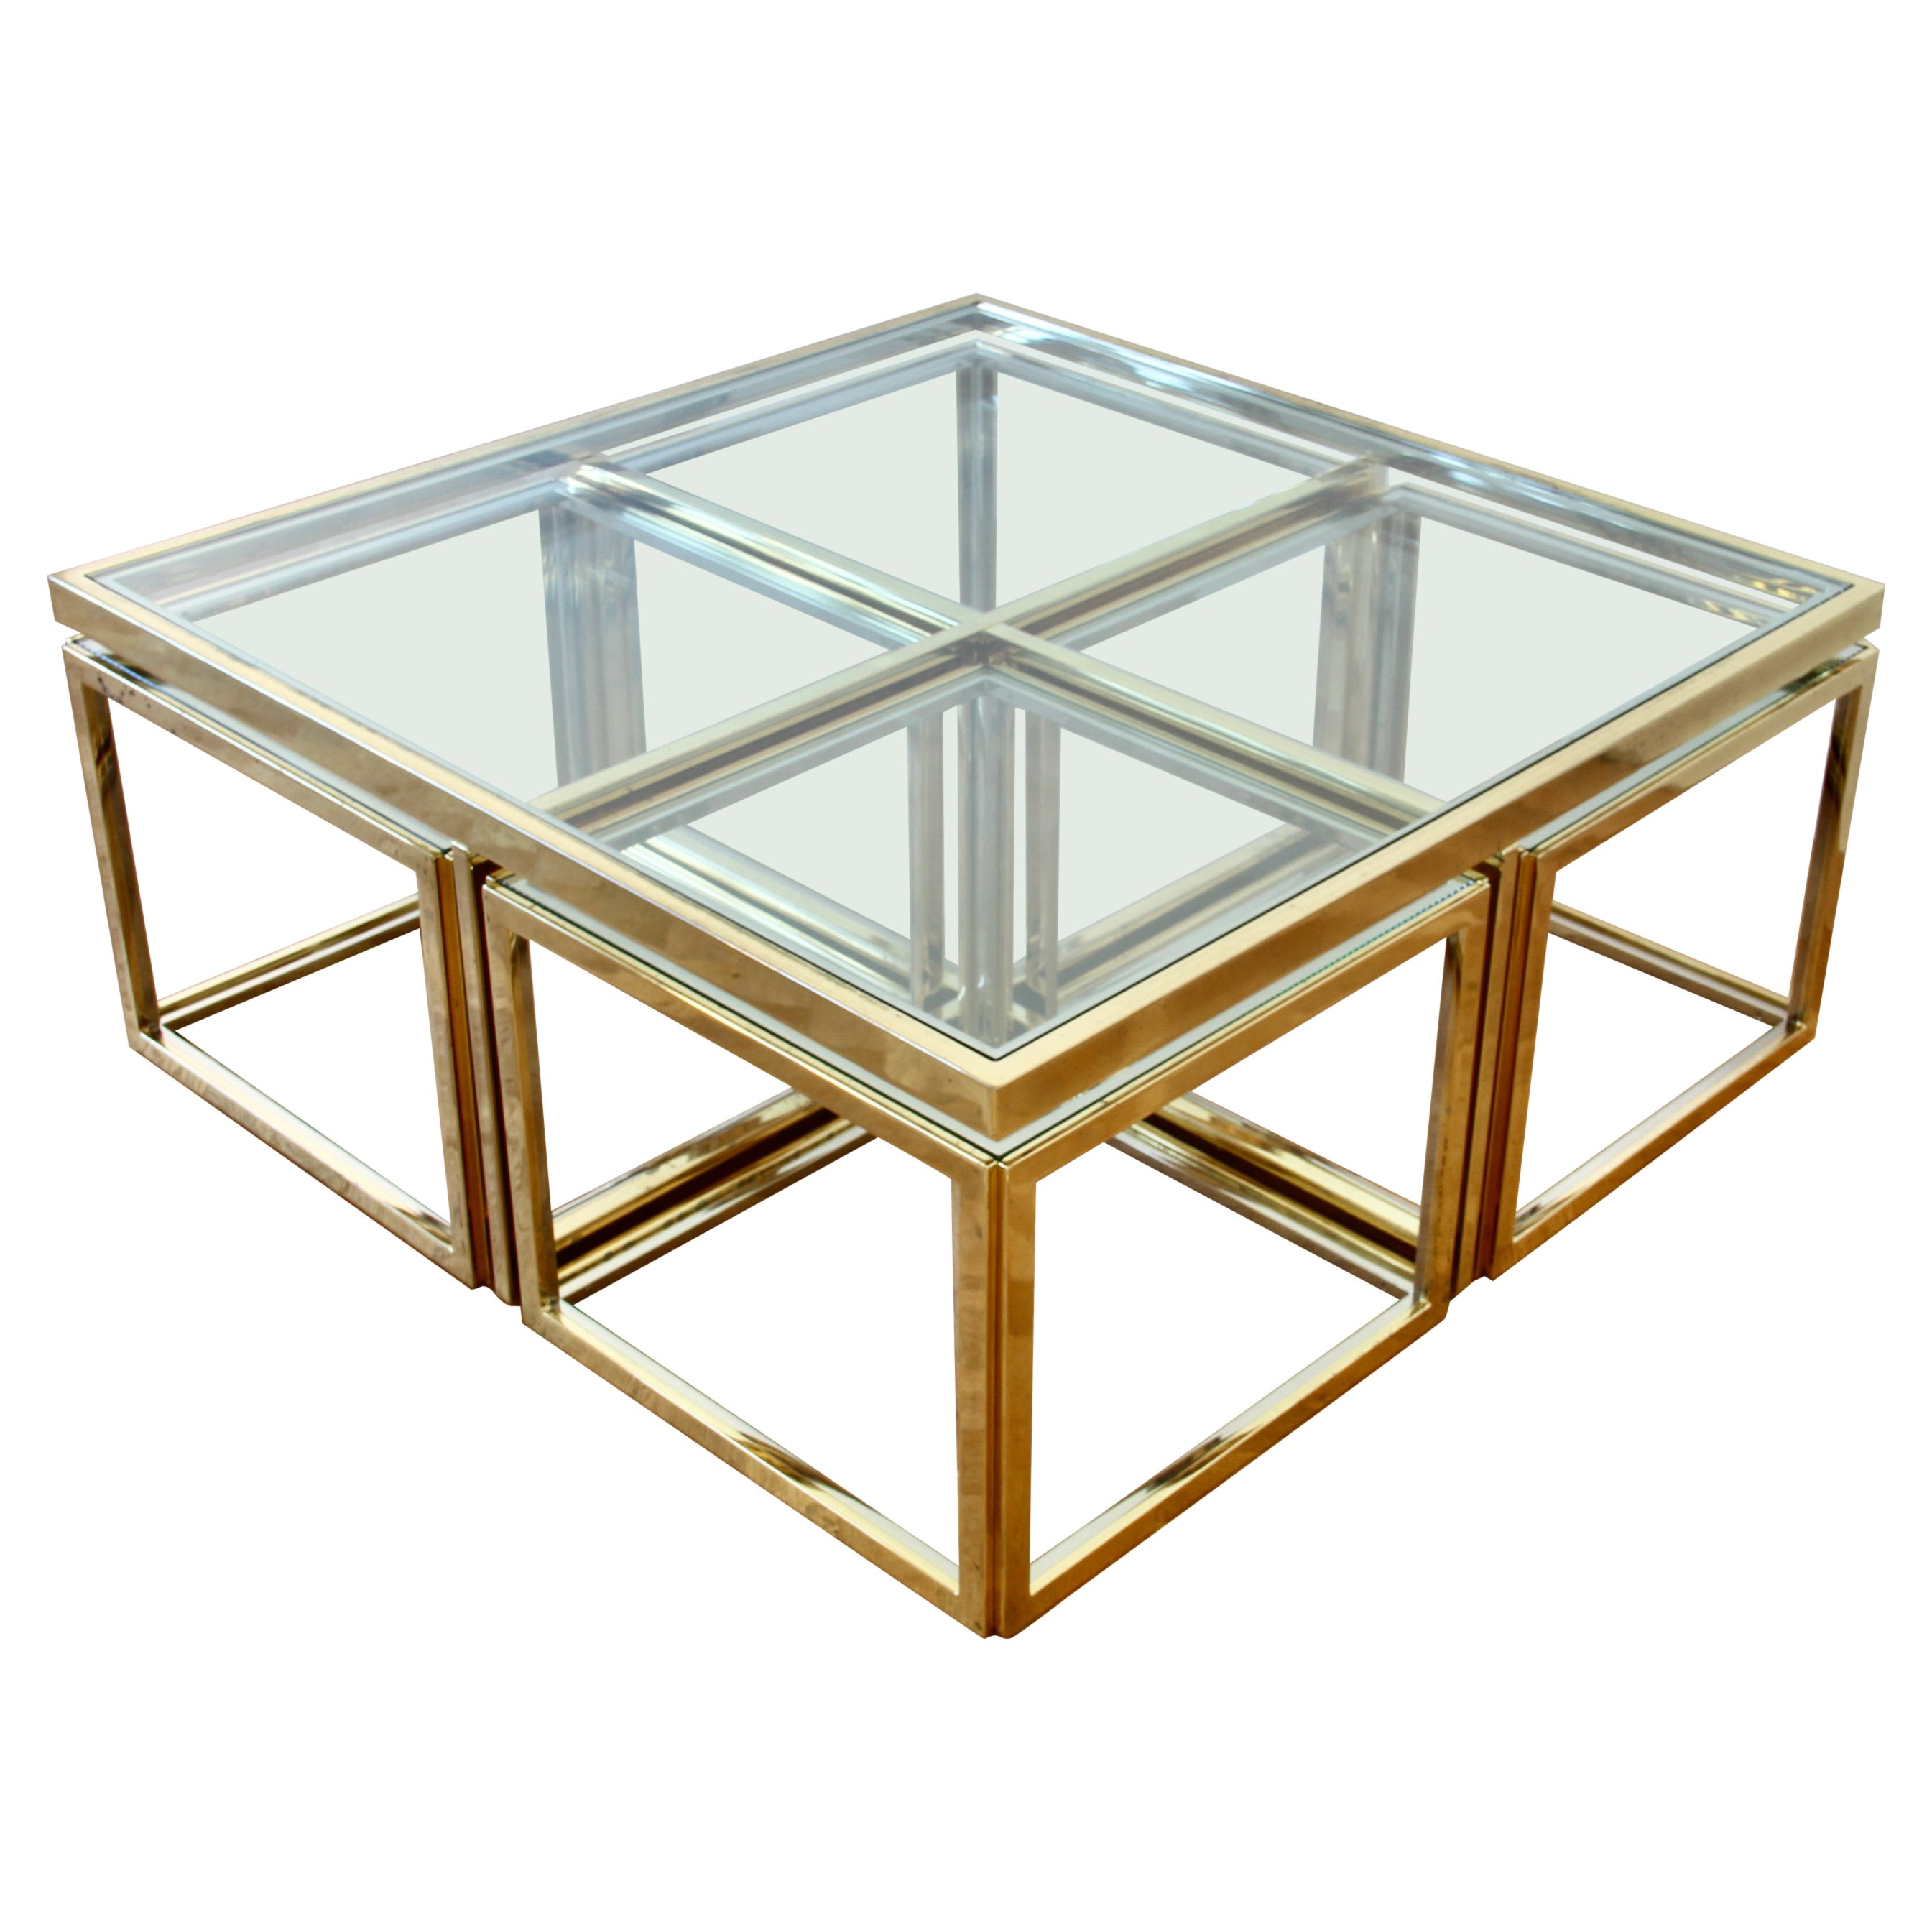 Maison Charles Style Brass / Chrome Bicolor Coffee Table & Nesting Tables, 1970s For Sale